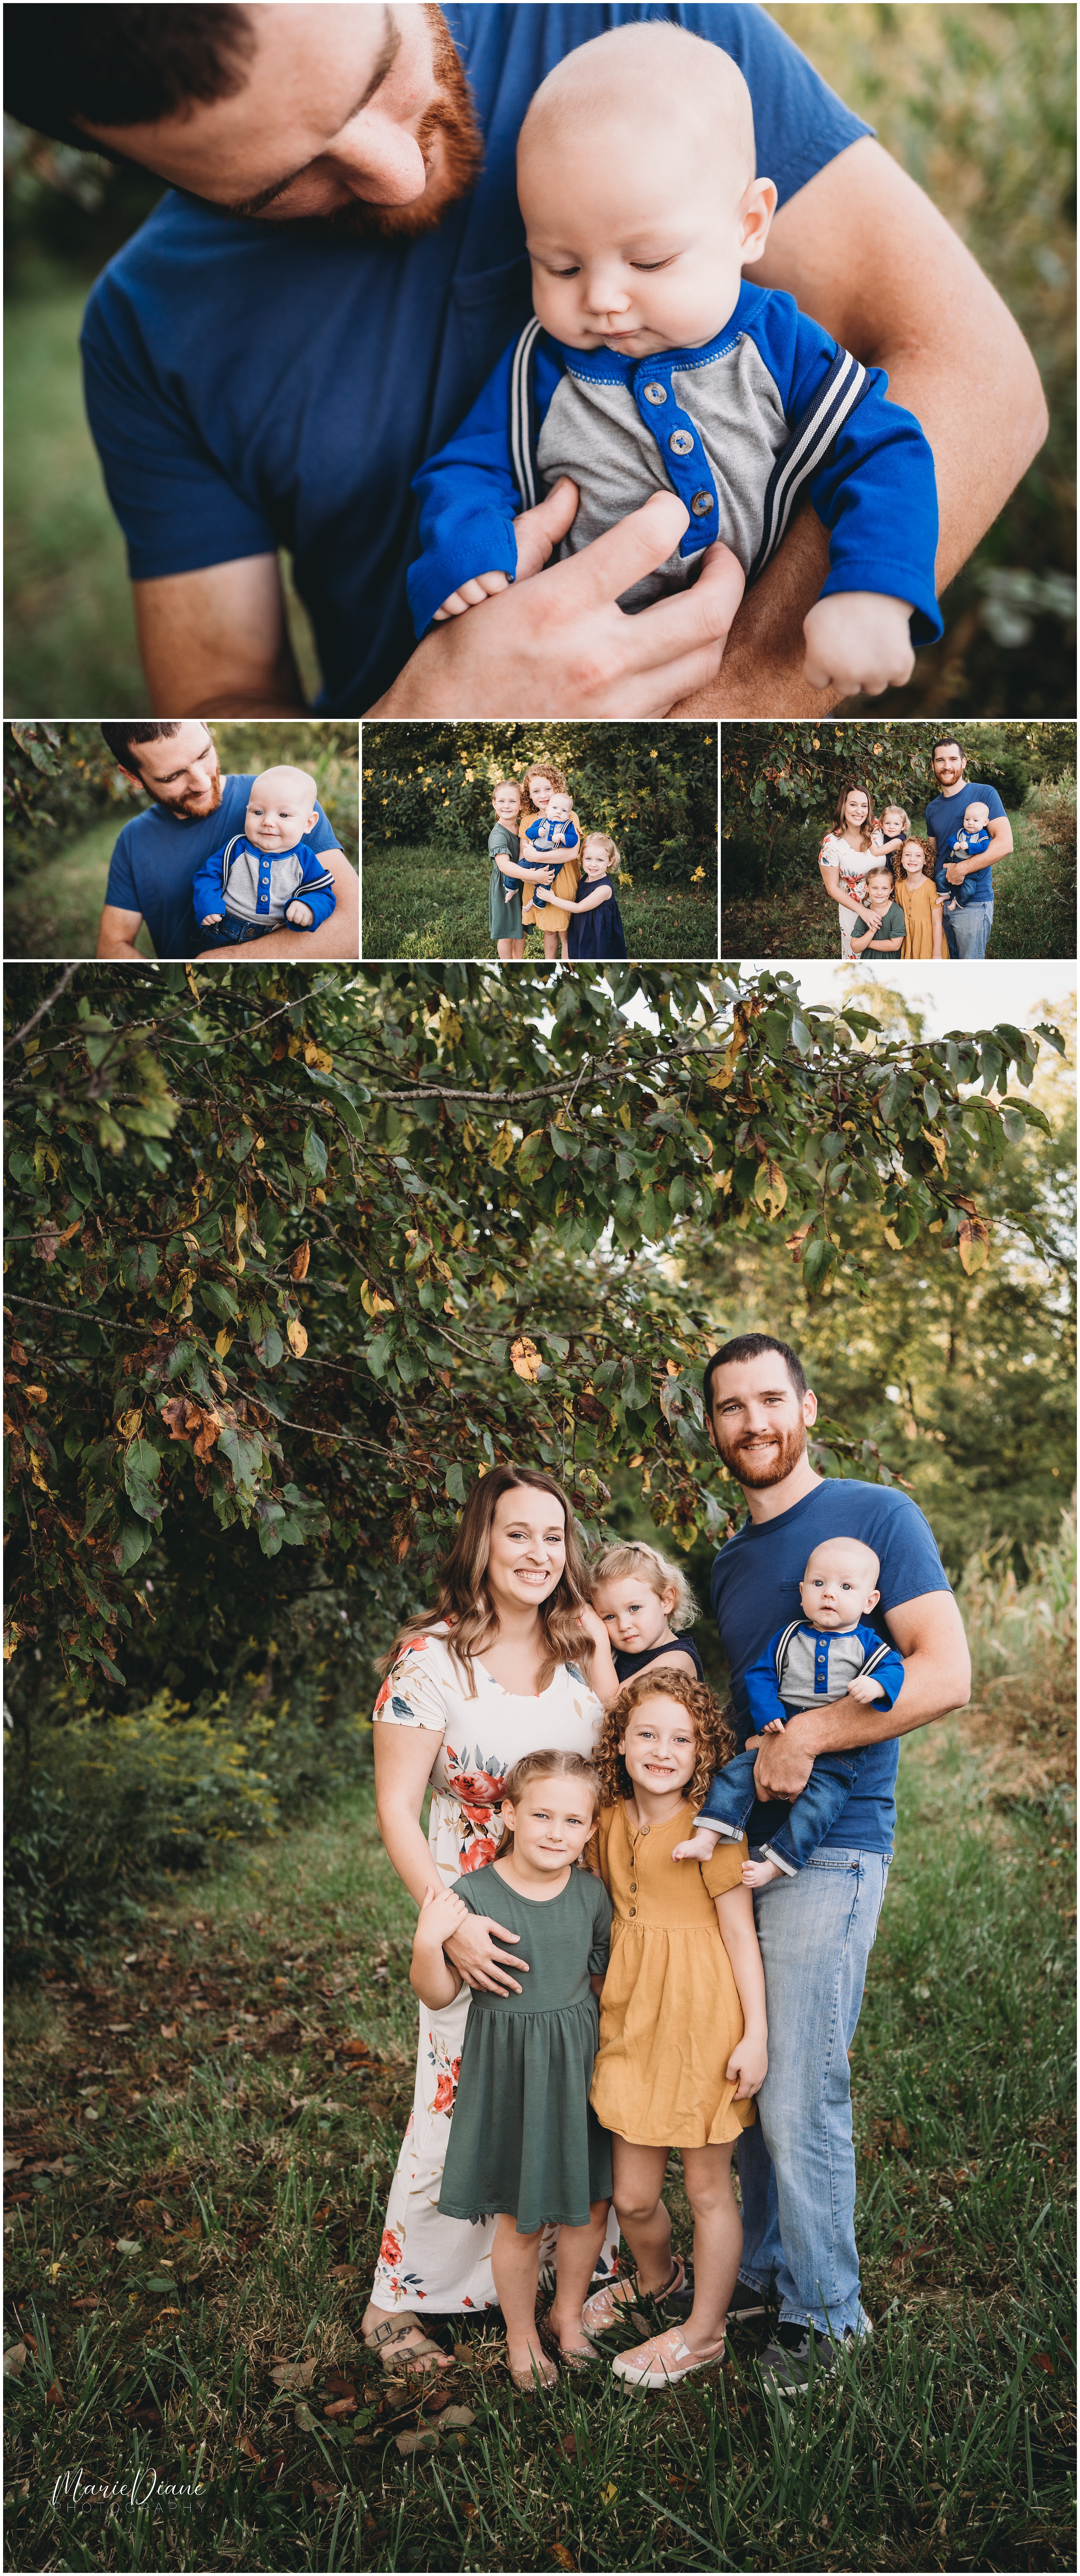 Collage of images of the entire family, starting with dad snuggling the youngest, a boy. The end image is the full family grouped next to a large tree with some browning leaves. 